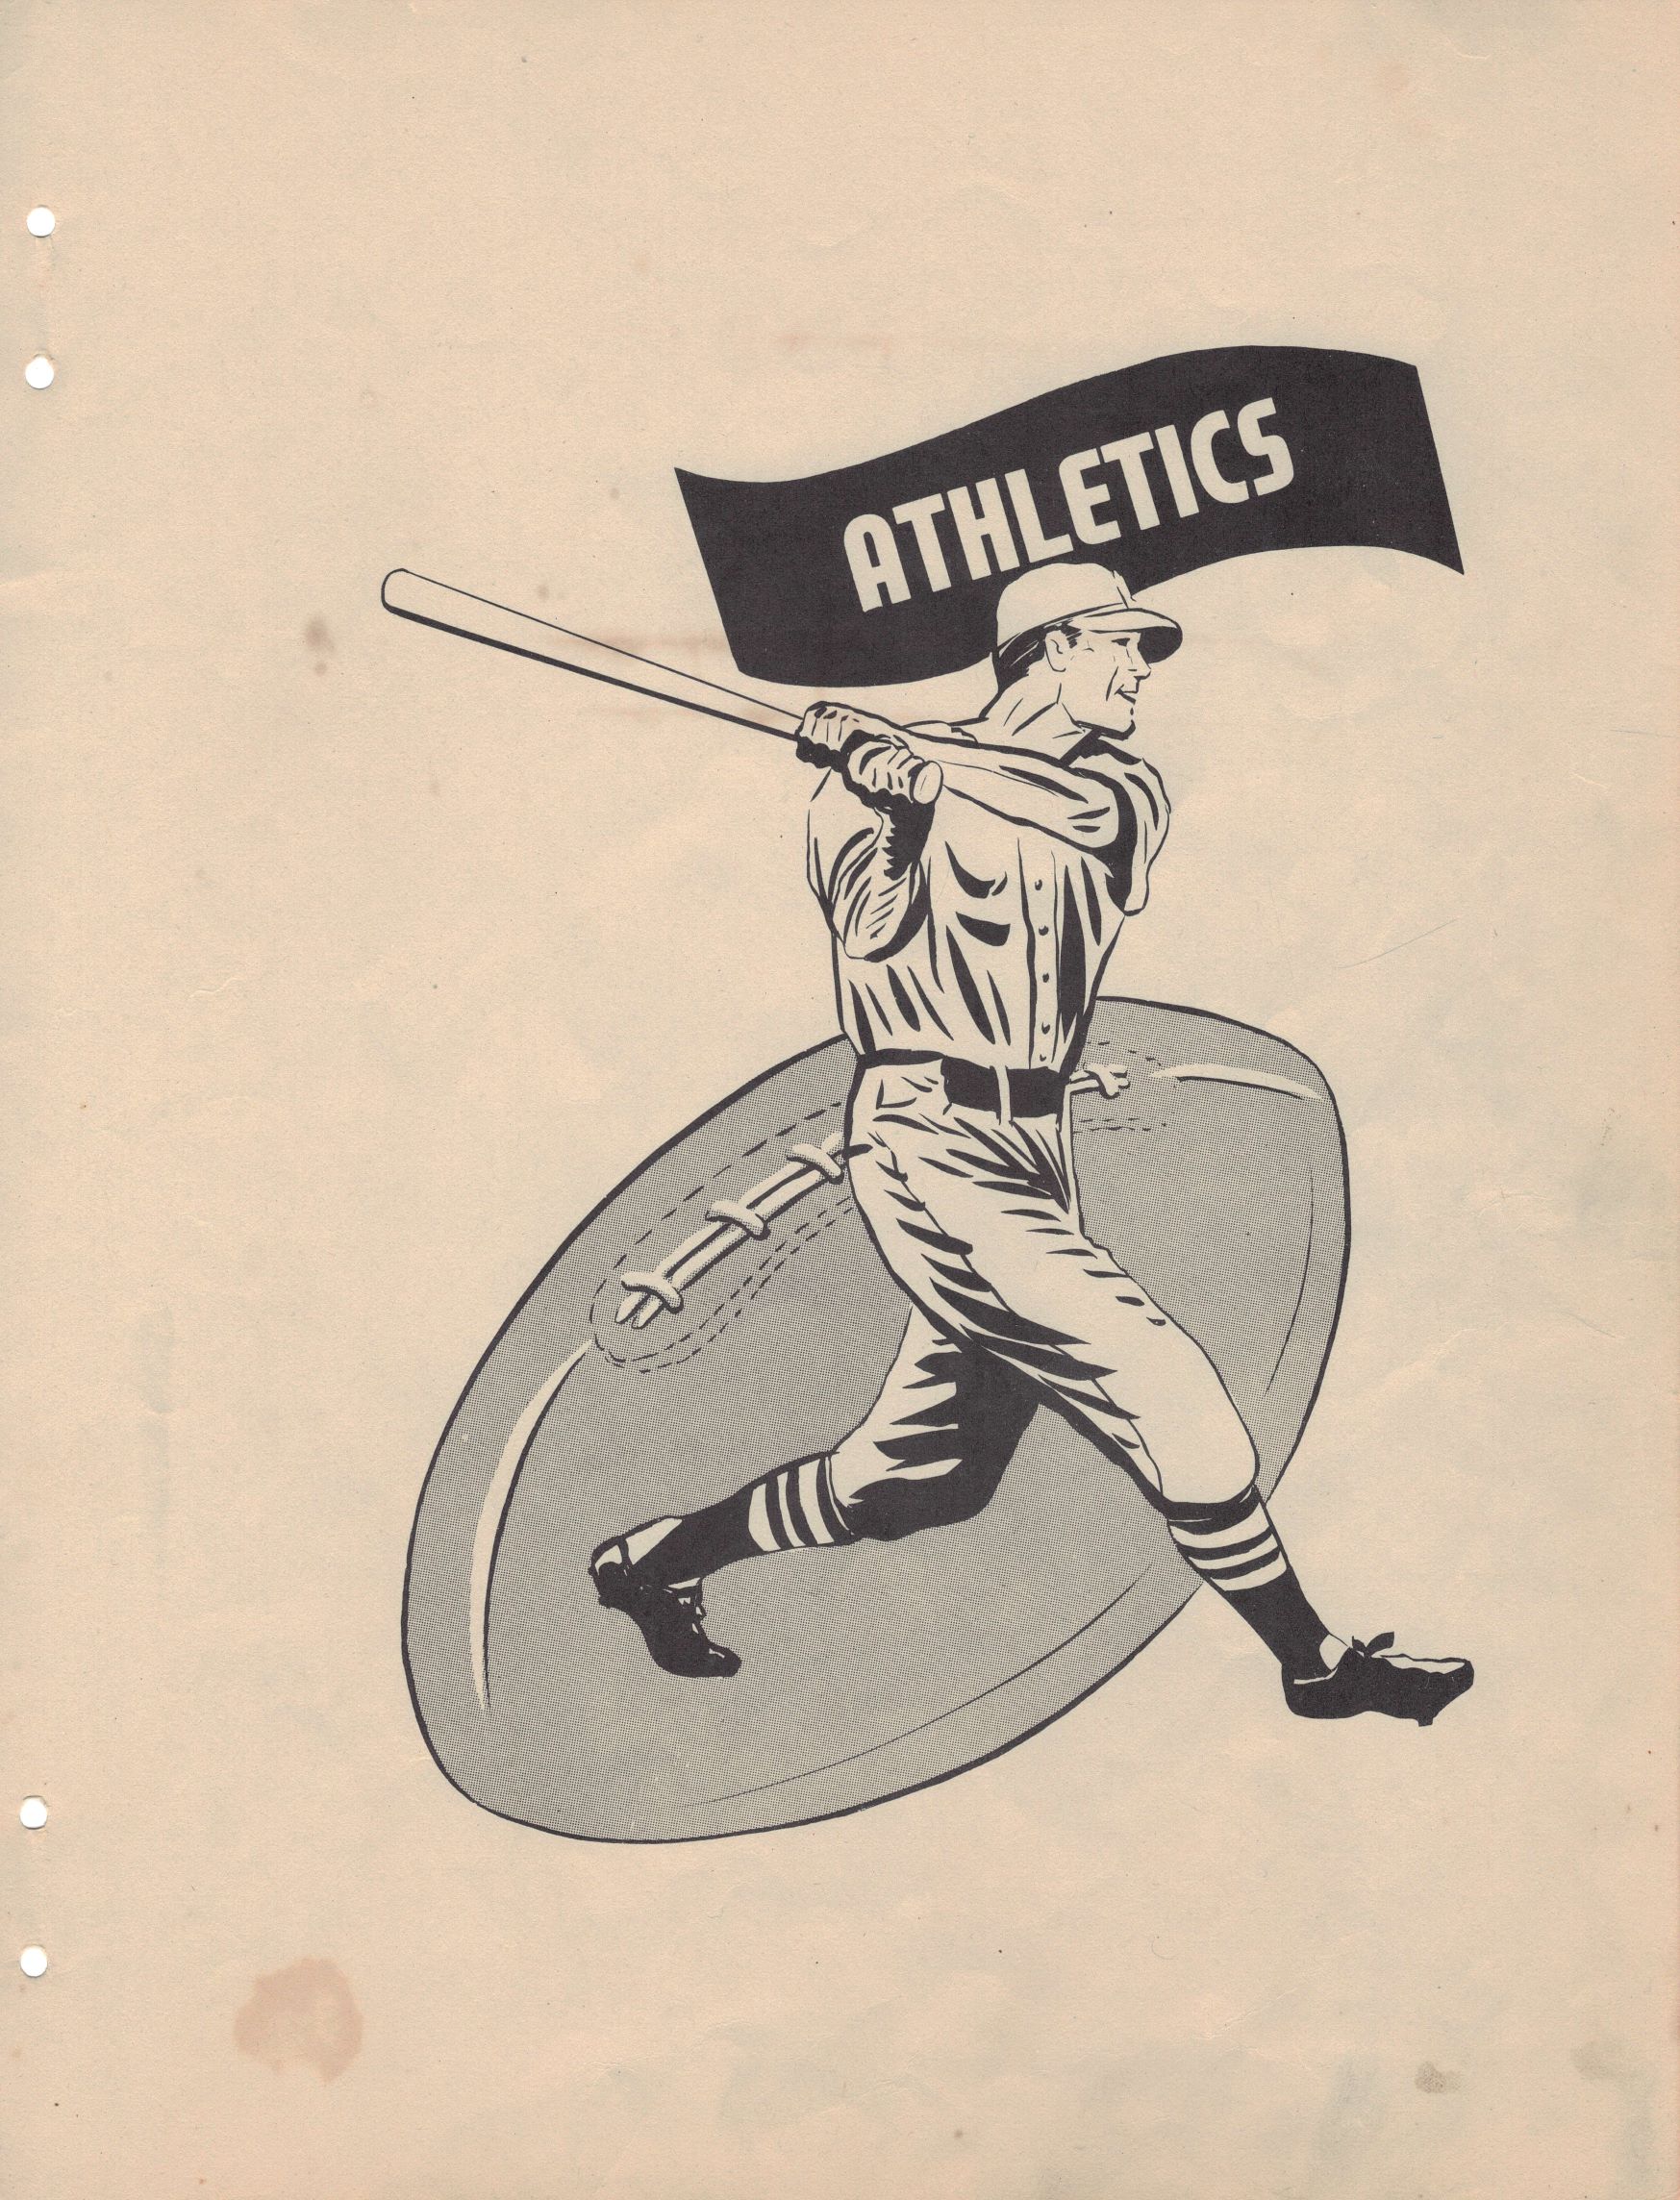 Graphic of a man in a baseball uniform swinging a baseball bat in front of a graphic of a football under the header "Athletics"